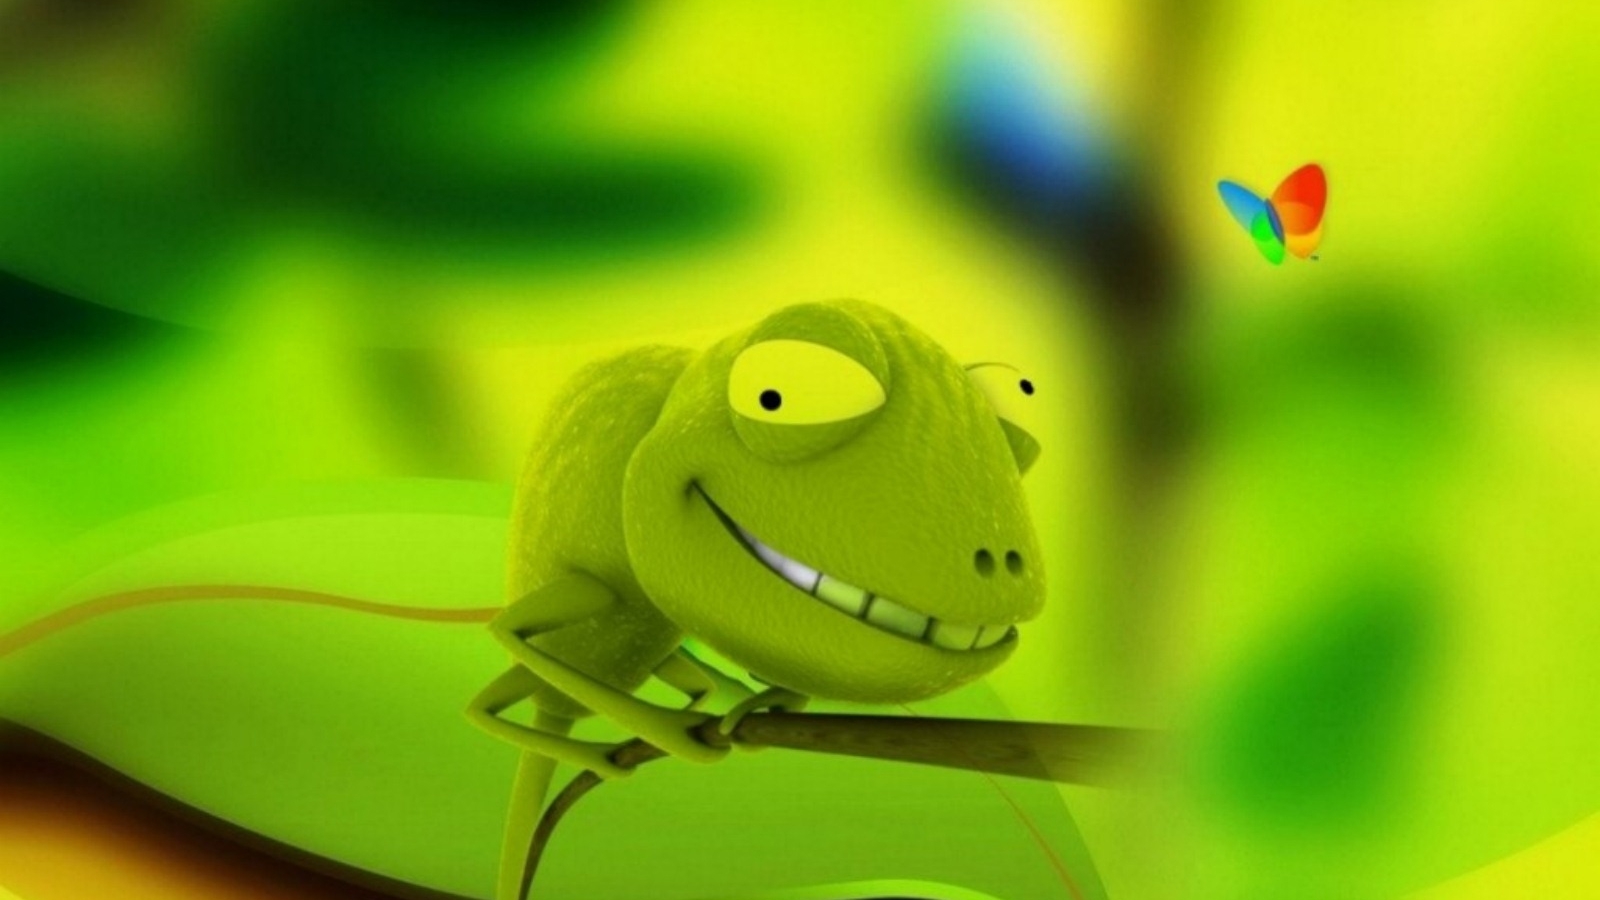 Reptile Suse Linux Wallpaper Funny Zoo